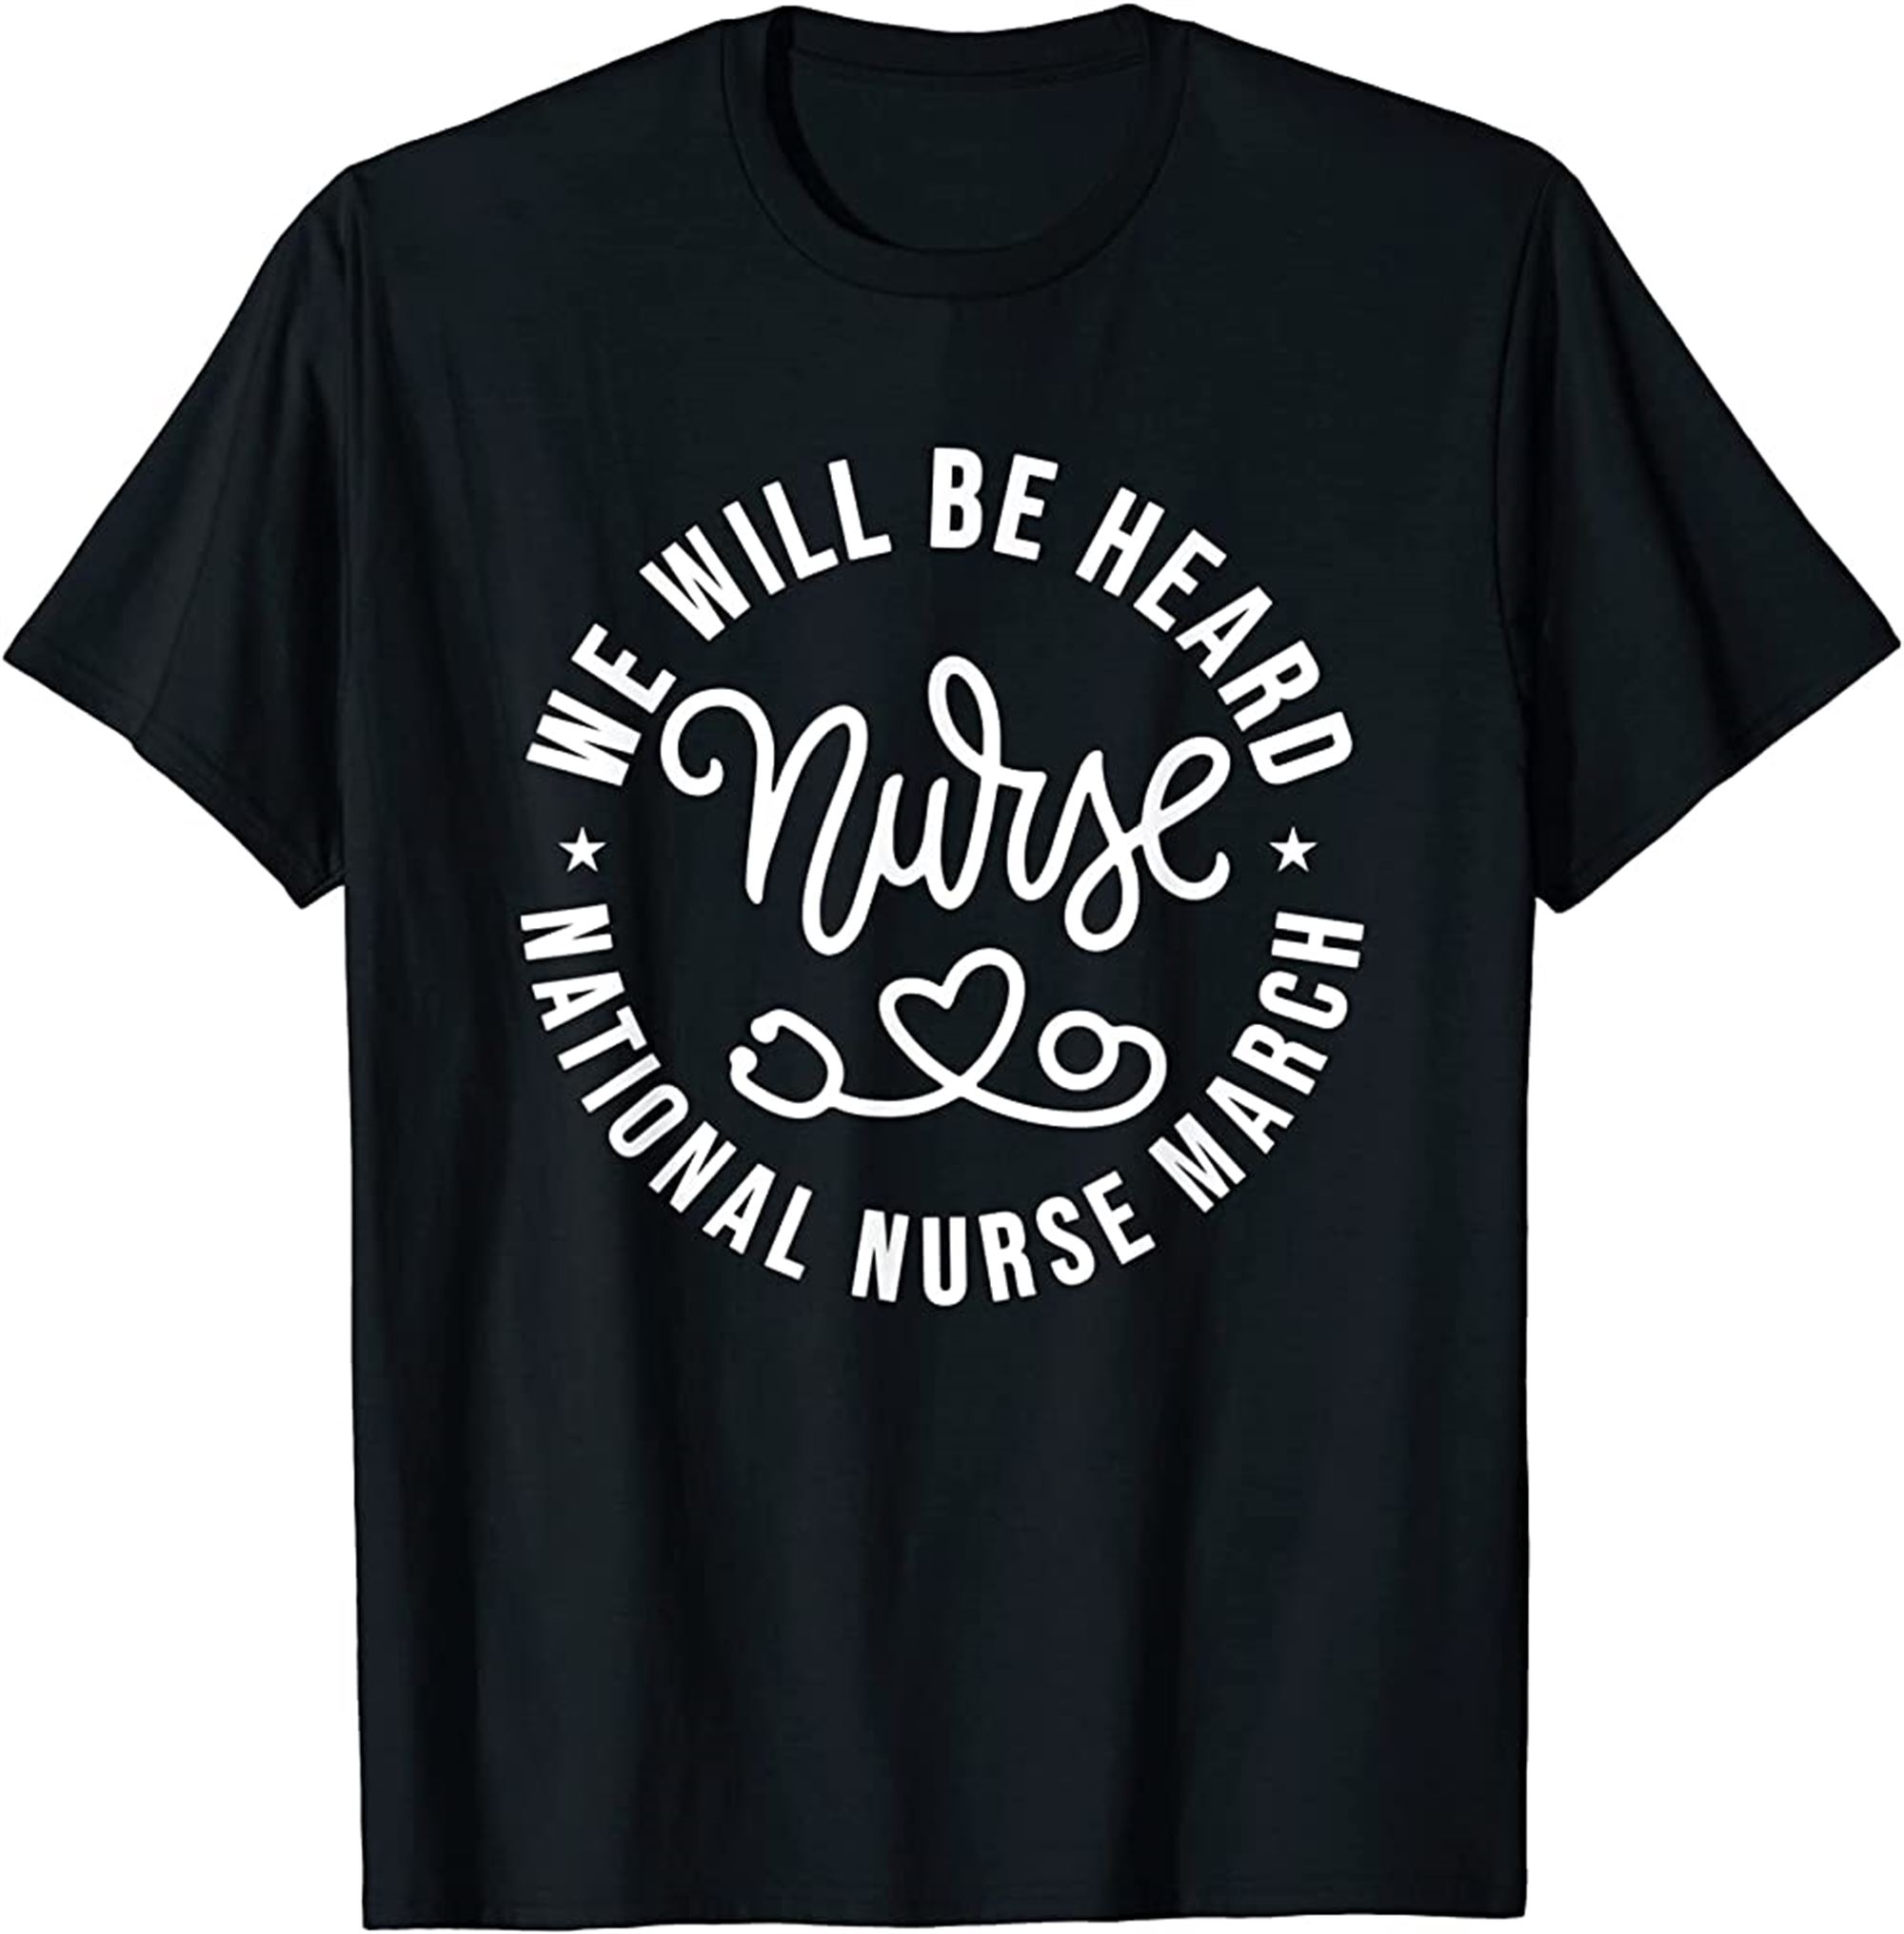 We Will Be Heard National Nurse March May 12 2022 T-shirt Full Size Up To 5xl